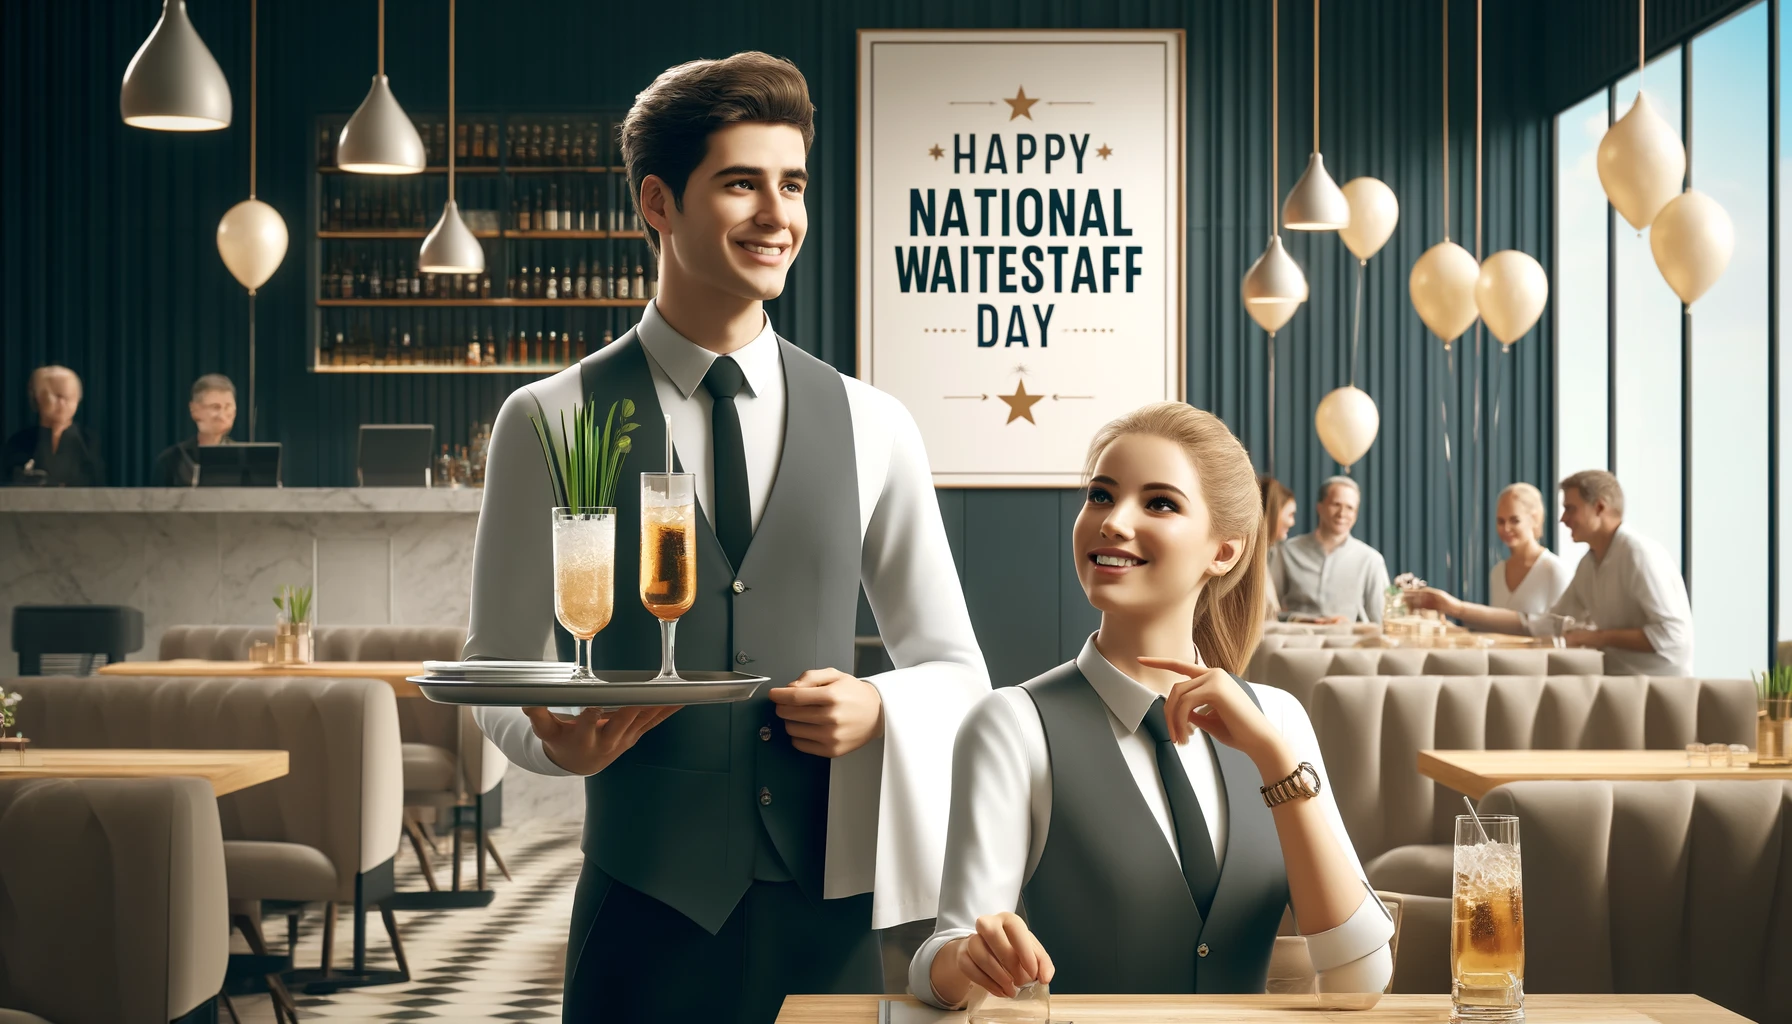 Deepest Thanks to Waitstaff This National Waitstaff Day